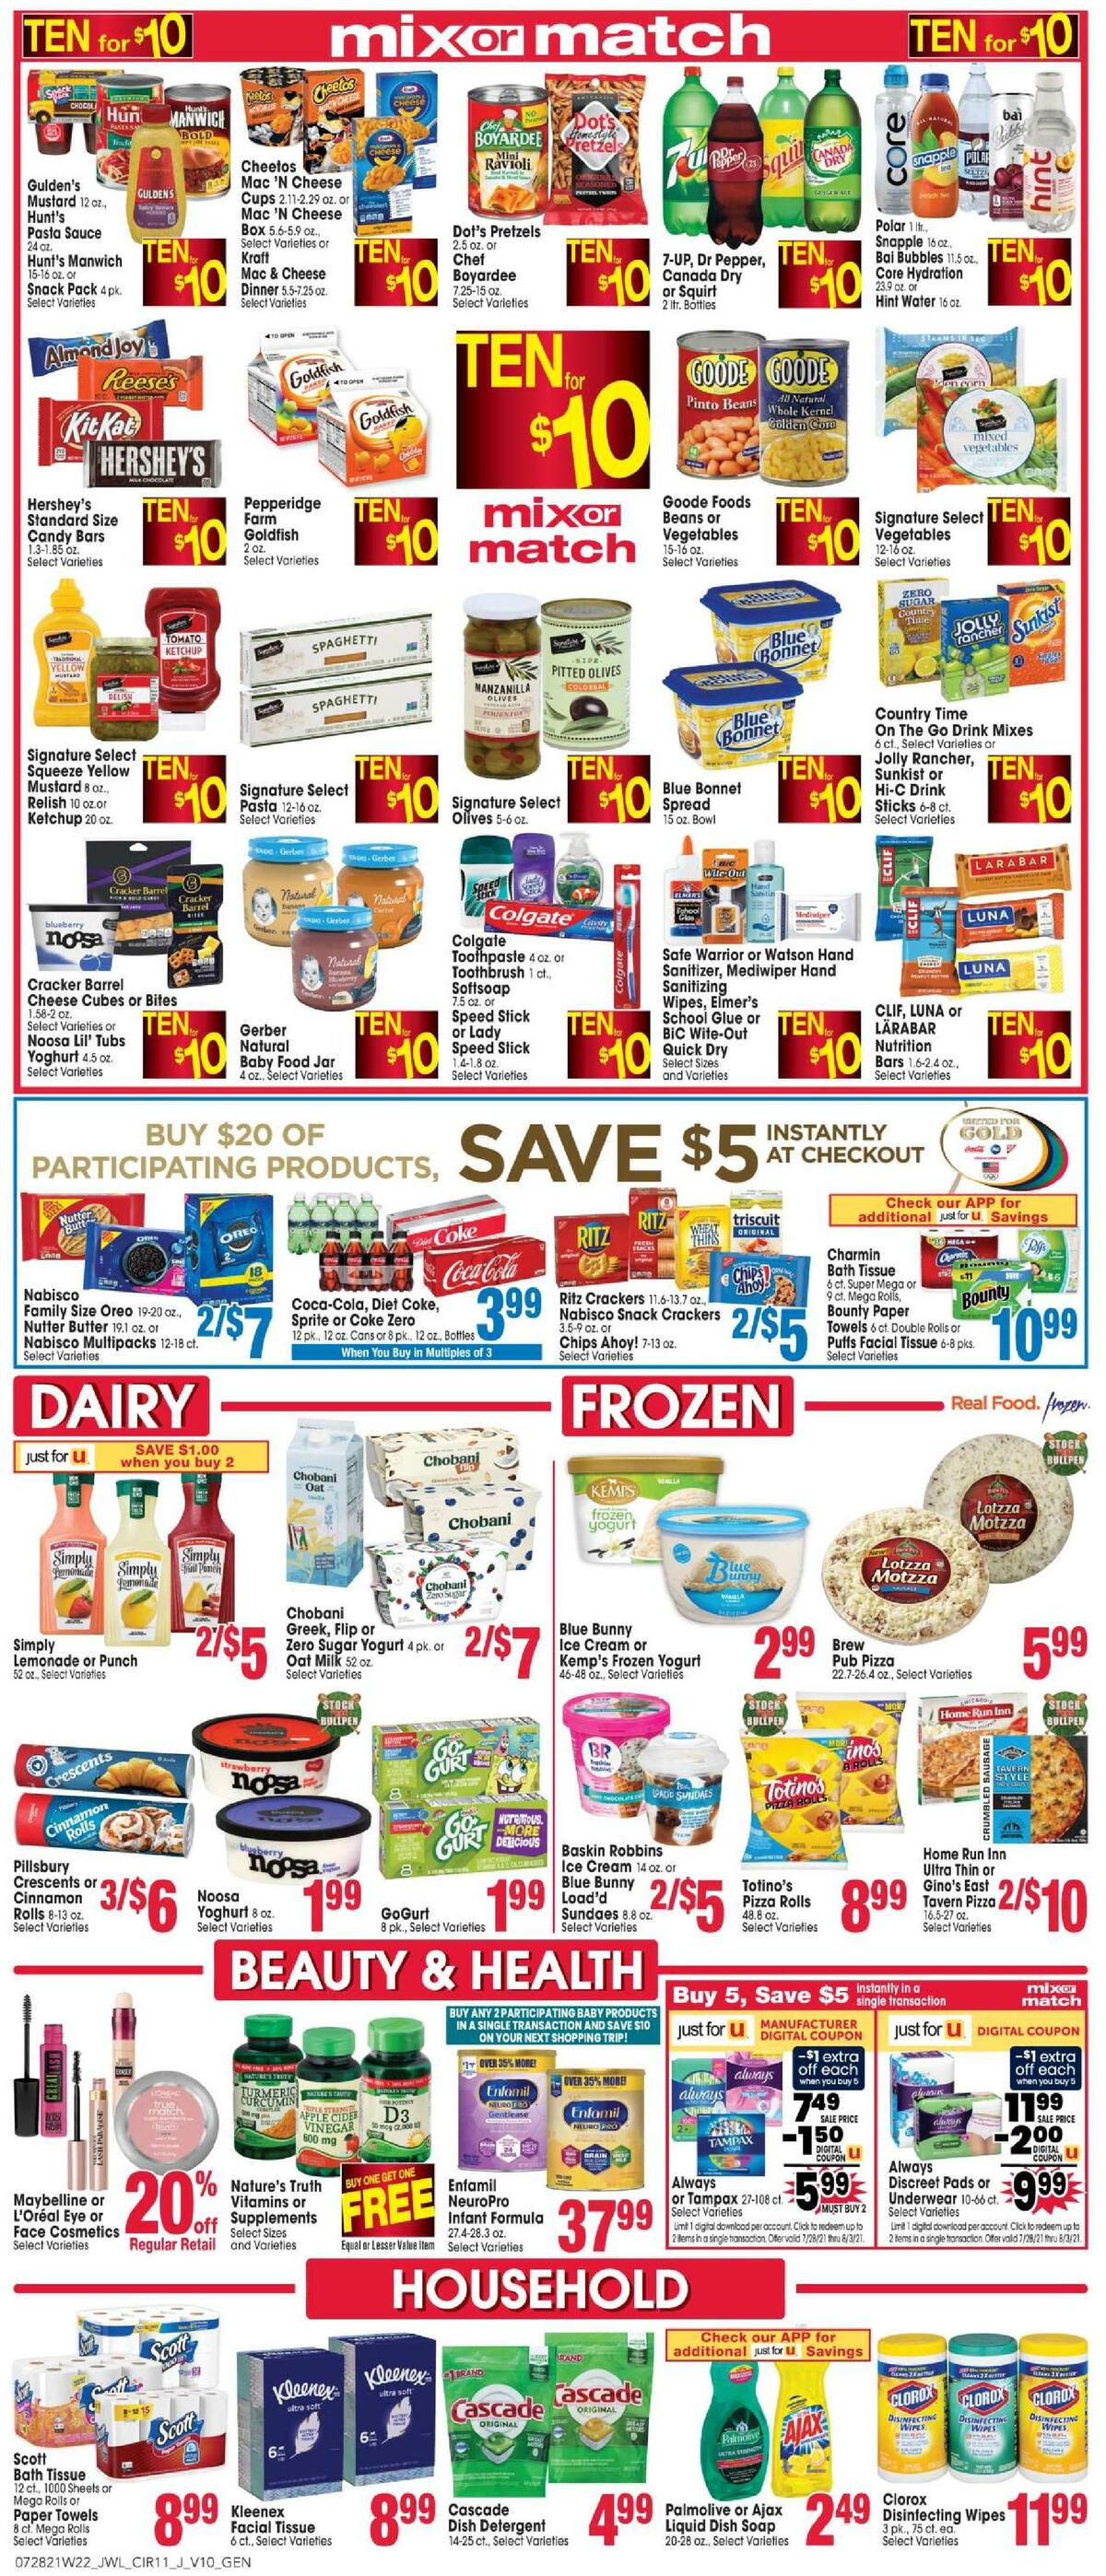 Jewel Osco Weekly Ad from July 28